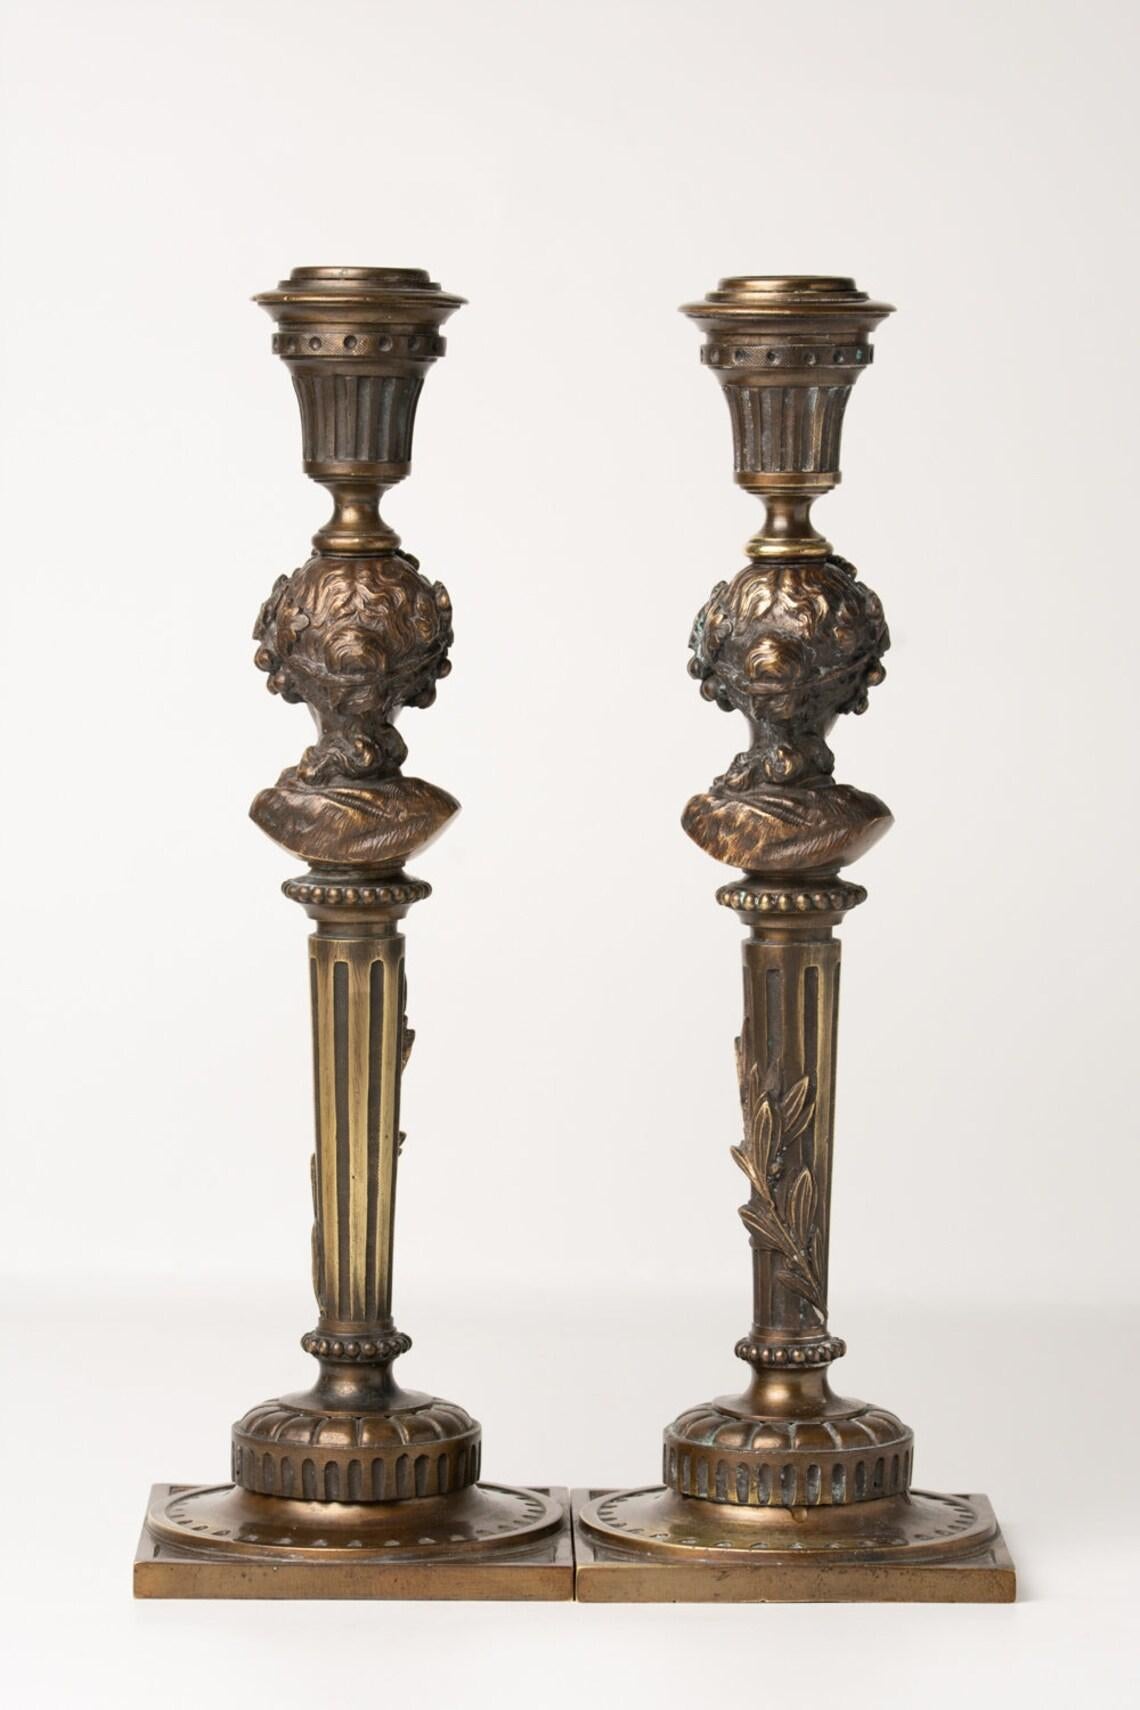 Antique pair of French bronze figural candlesticks depicting Bacchante maidens ( Female followers of Bacchus were called Bacchante. Their heads are beautifully decorated with wine leaves and grapes with their hair up. Their heads are placed on